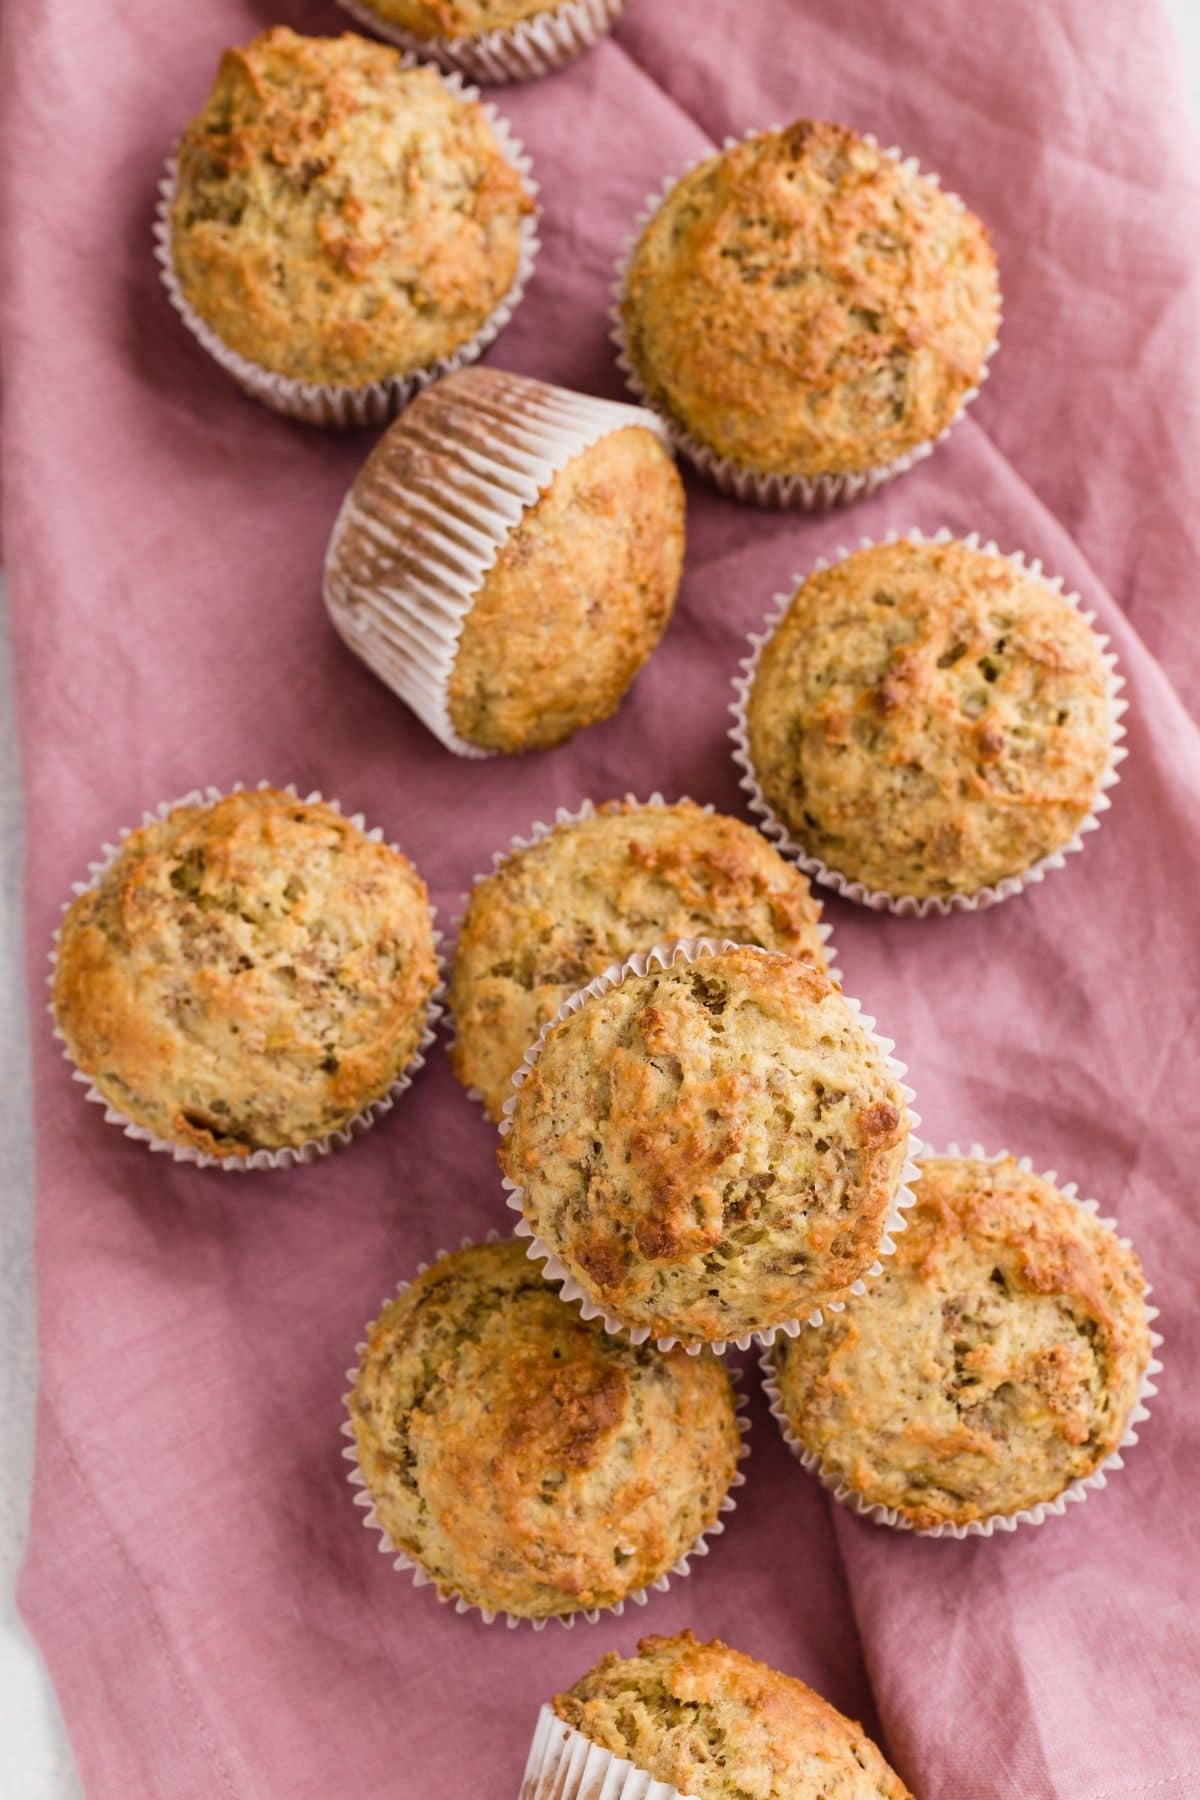 Banana Bran Muffins scattered on a pink napkin.